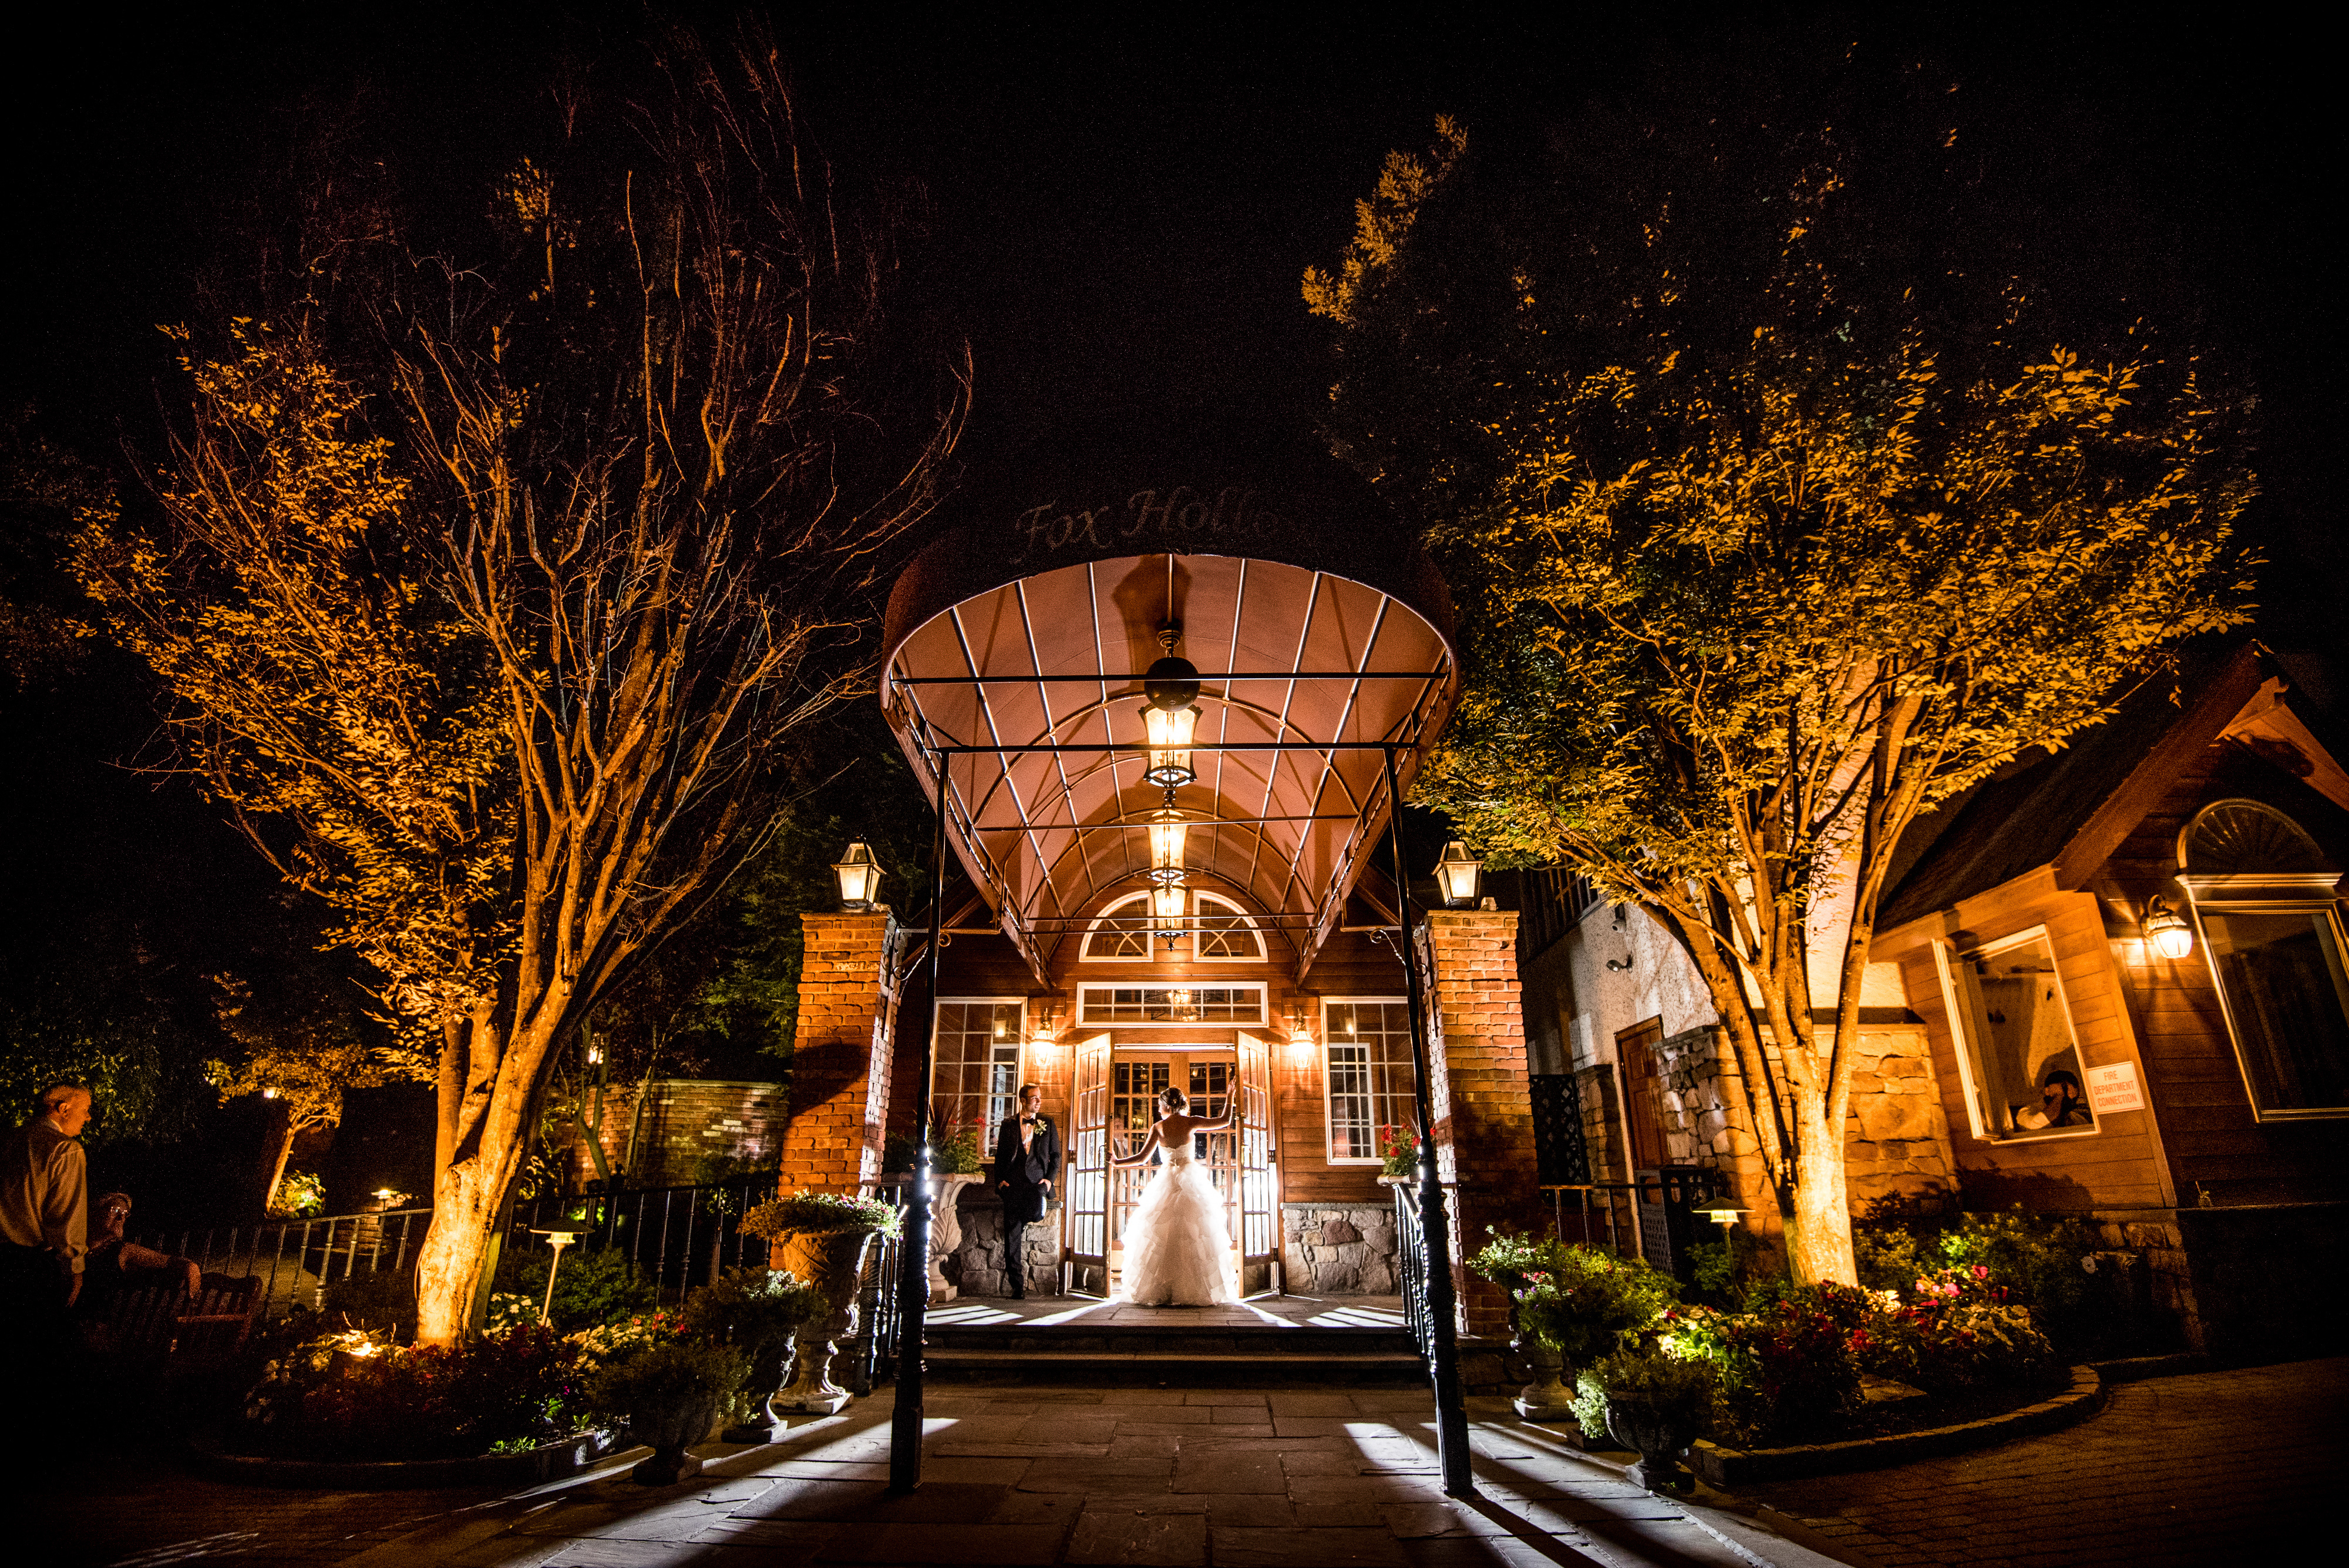 Night Time at Fox Hollow with Bride | Lotus Wedding Photography